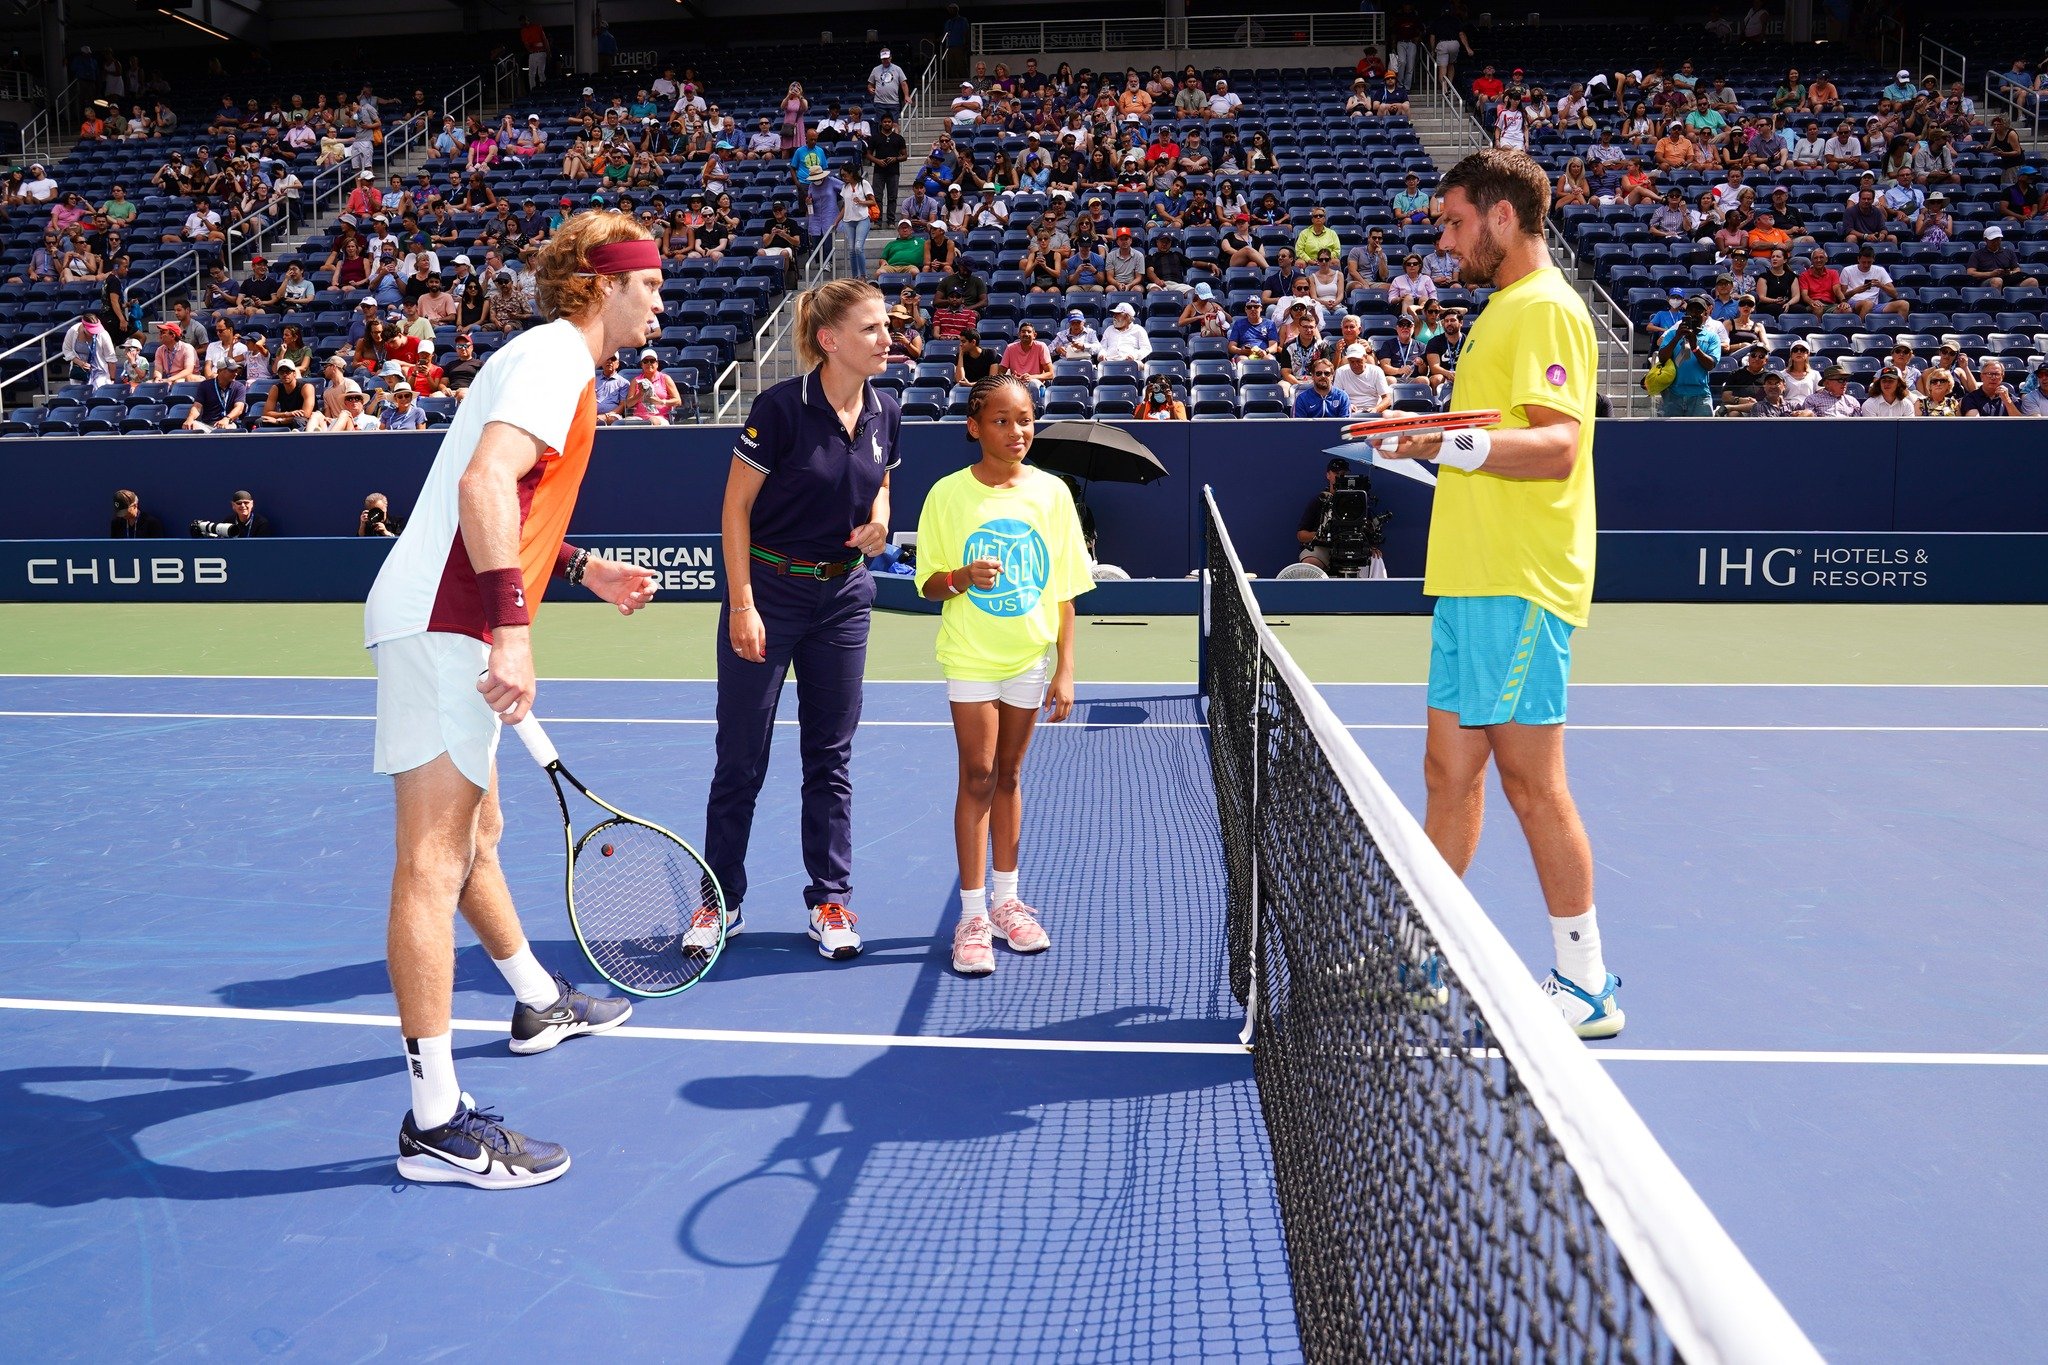 Paige Williams does Coin Toss at Us Open match 2022.jpg